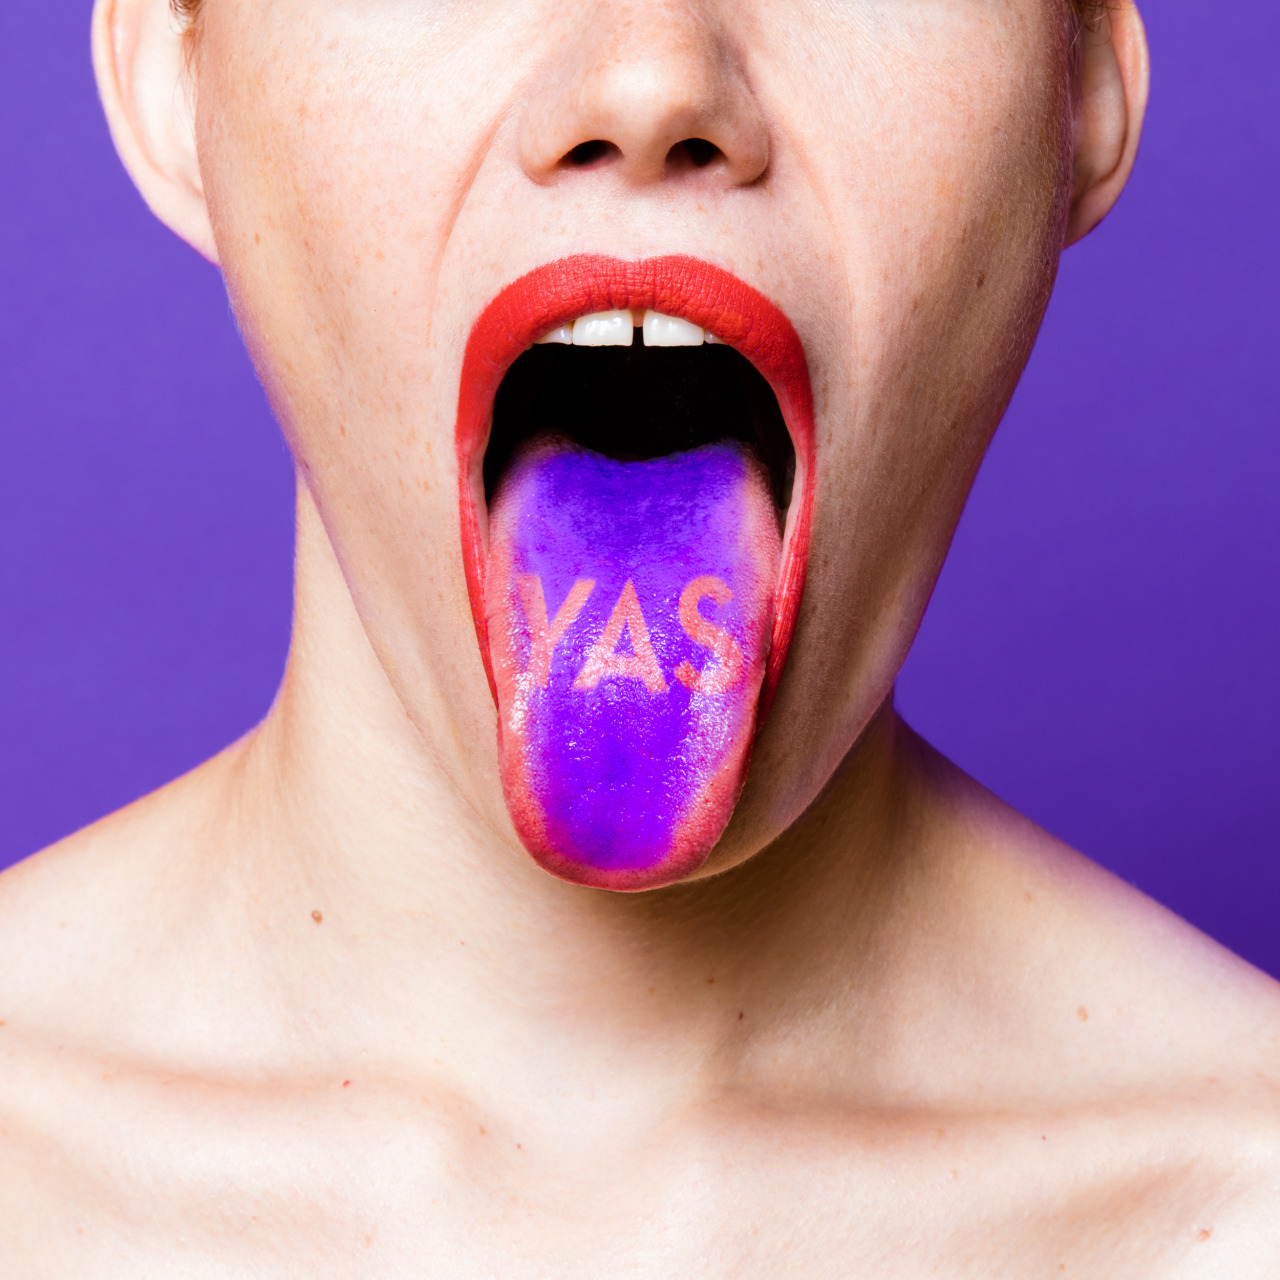 Milly Advertising Rebrand by Sagmeister & Walsh
“MILLY (by Michelle Smith) wanted to rebrand their advertising and communications to reflect the attributes of their new collections: edgy, irreverent, bold and colorful. When Michelle established the...